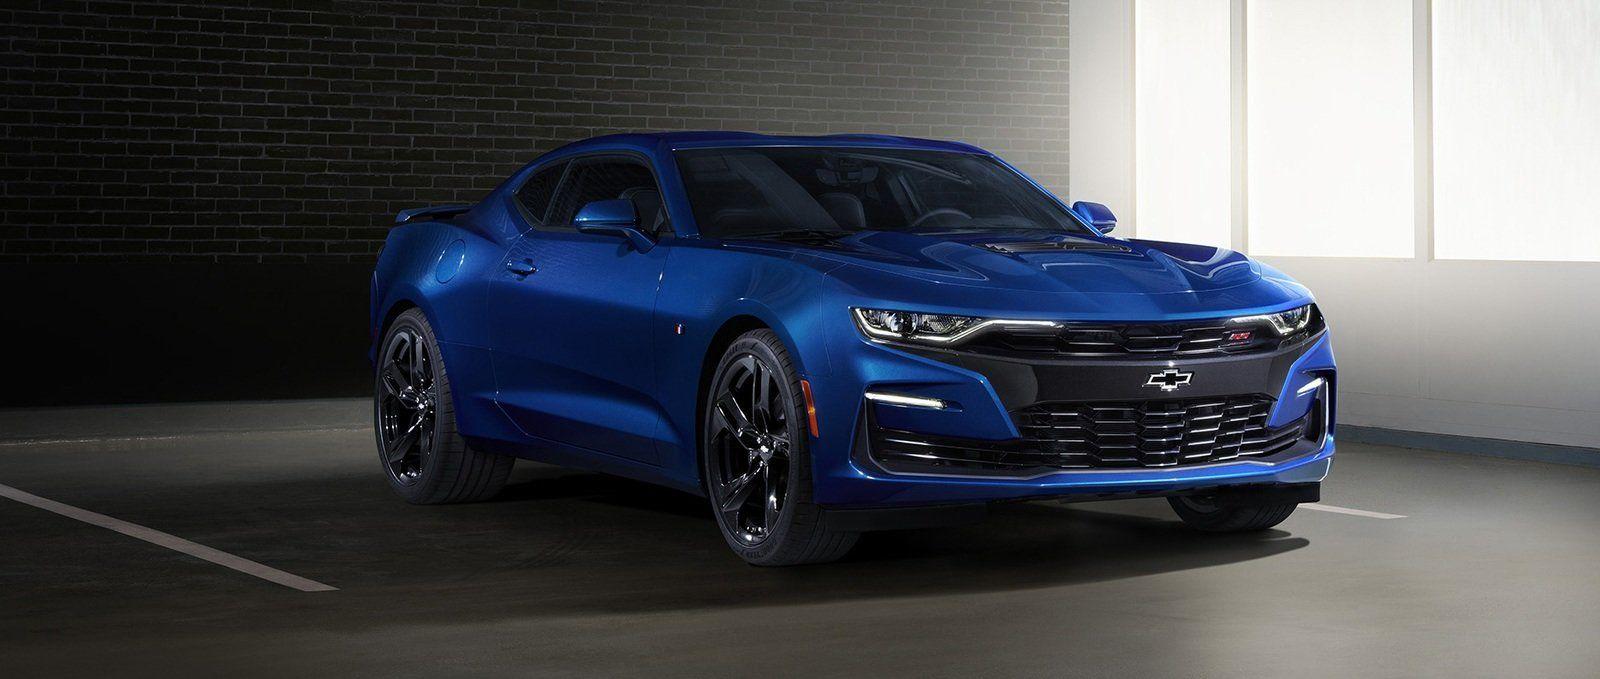 Chevrolet Camaro Picture, Photo, Wallpaper And Videos. Top